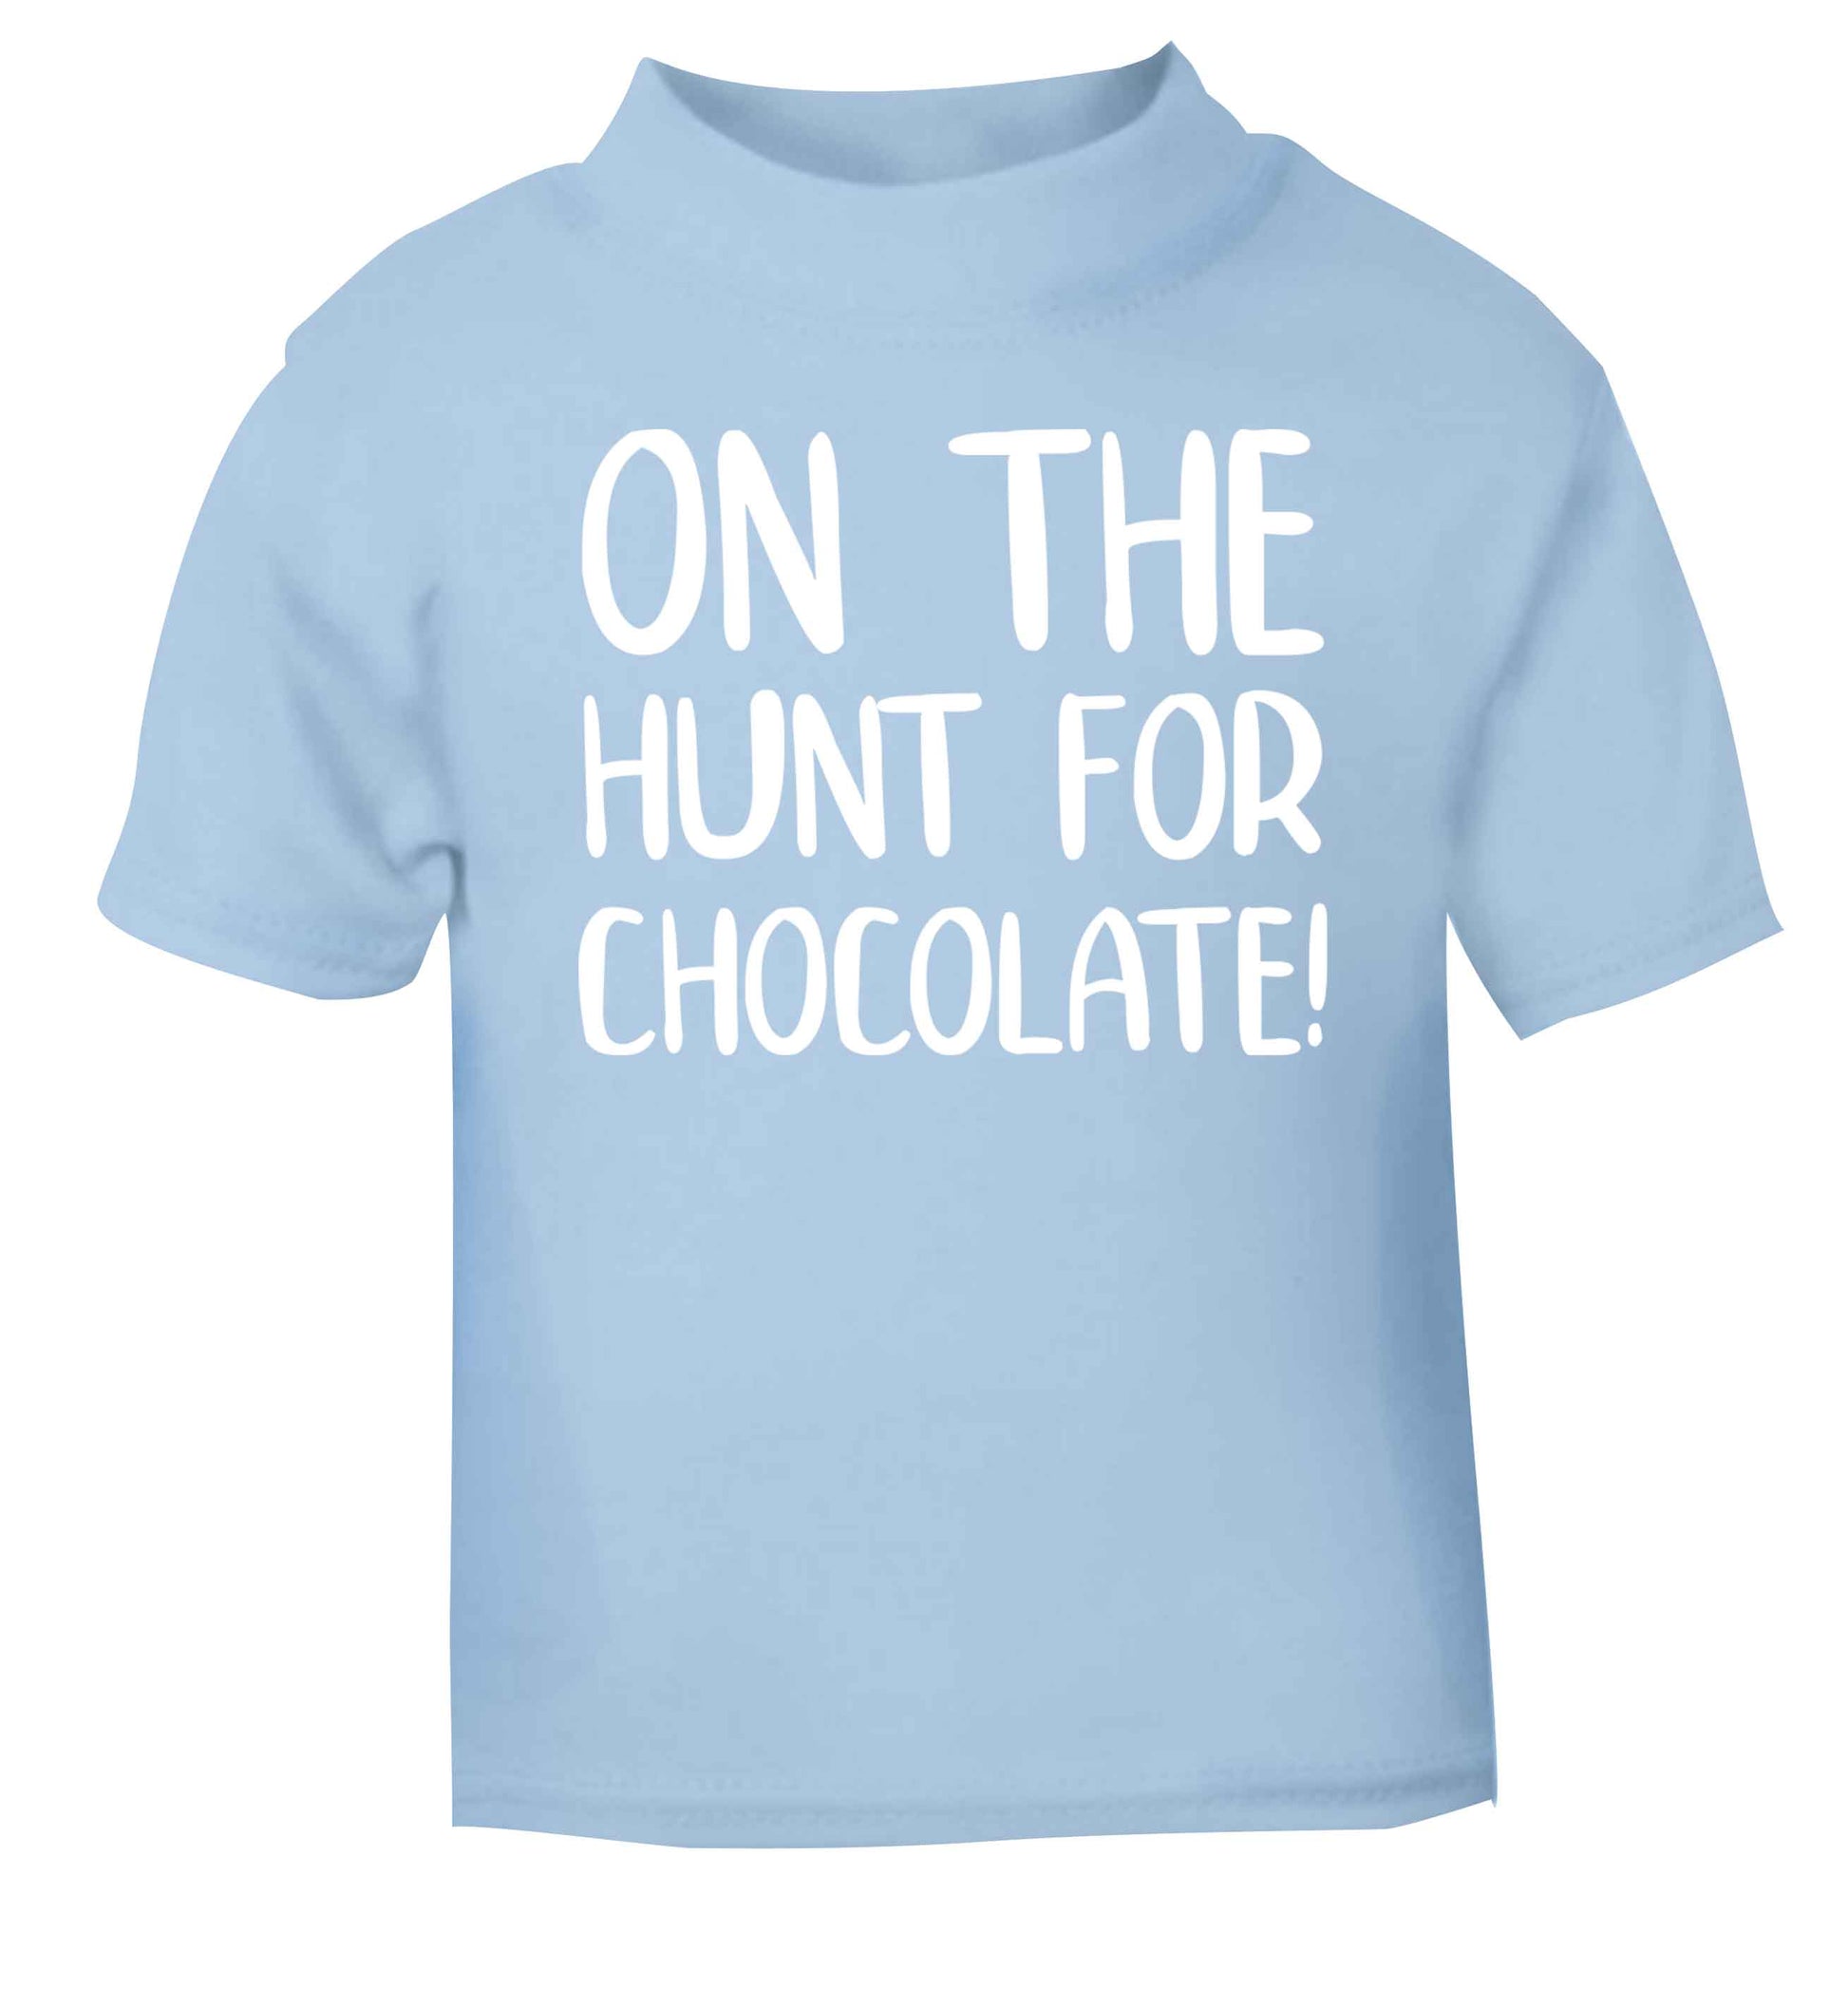 On the hunt for chocolate! light blue baby toddler Tshirt 2 Years